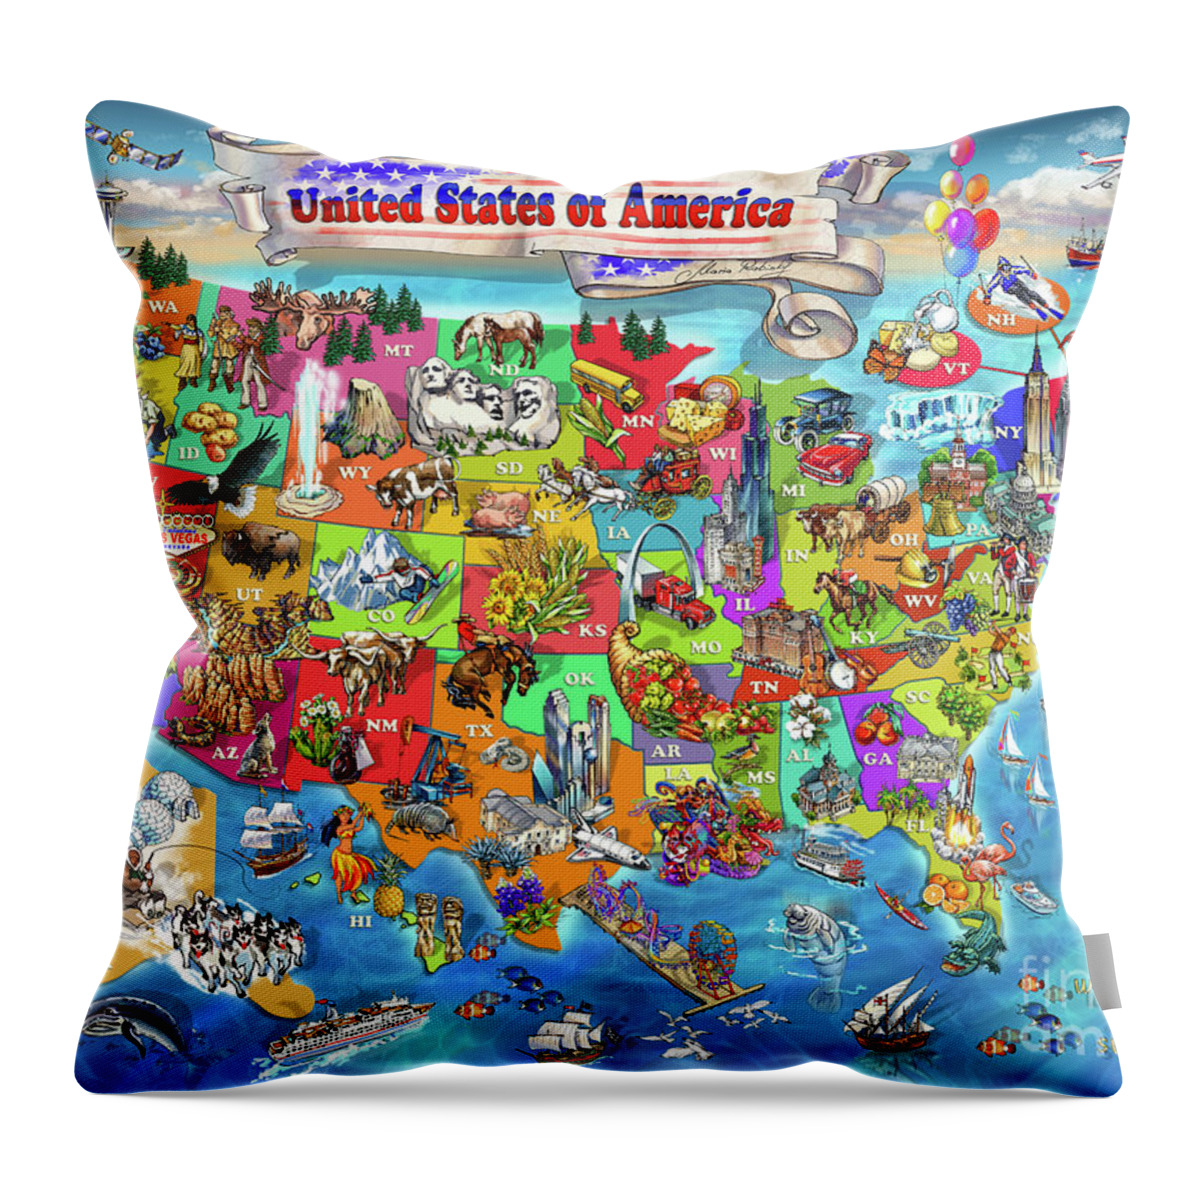 Children's Illustrated Map Of The Usa Throw Pillow featuring the digital art Illustrated Map of the USA by Maria Rabinky